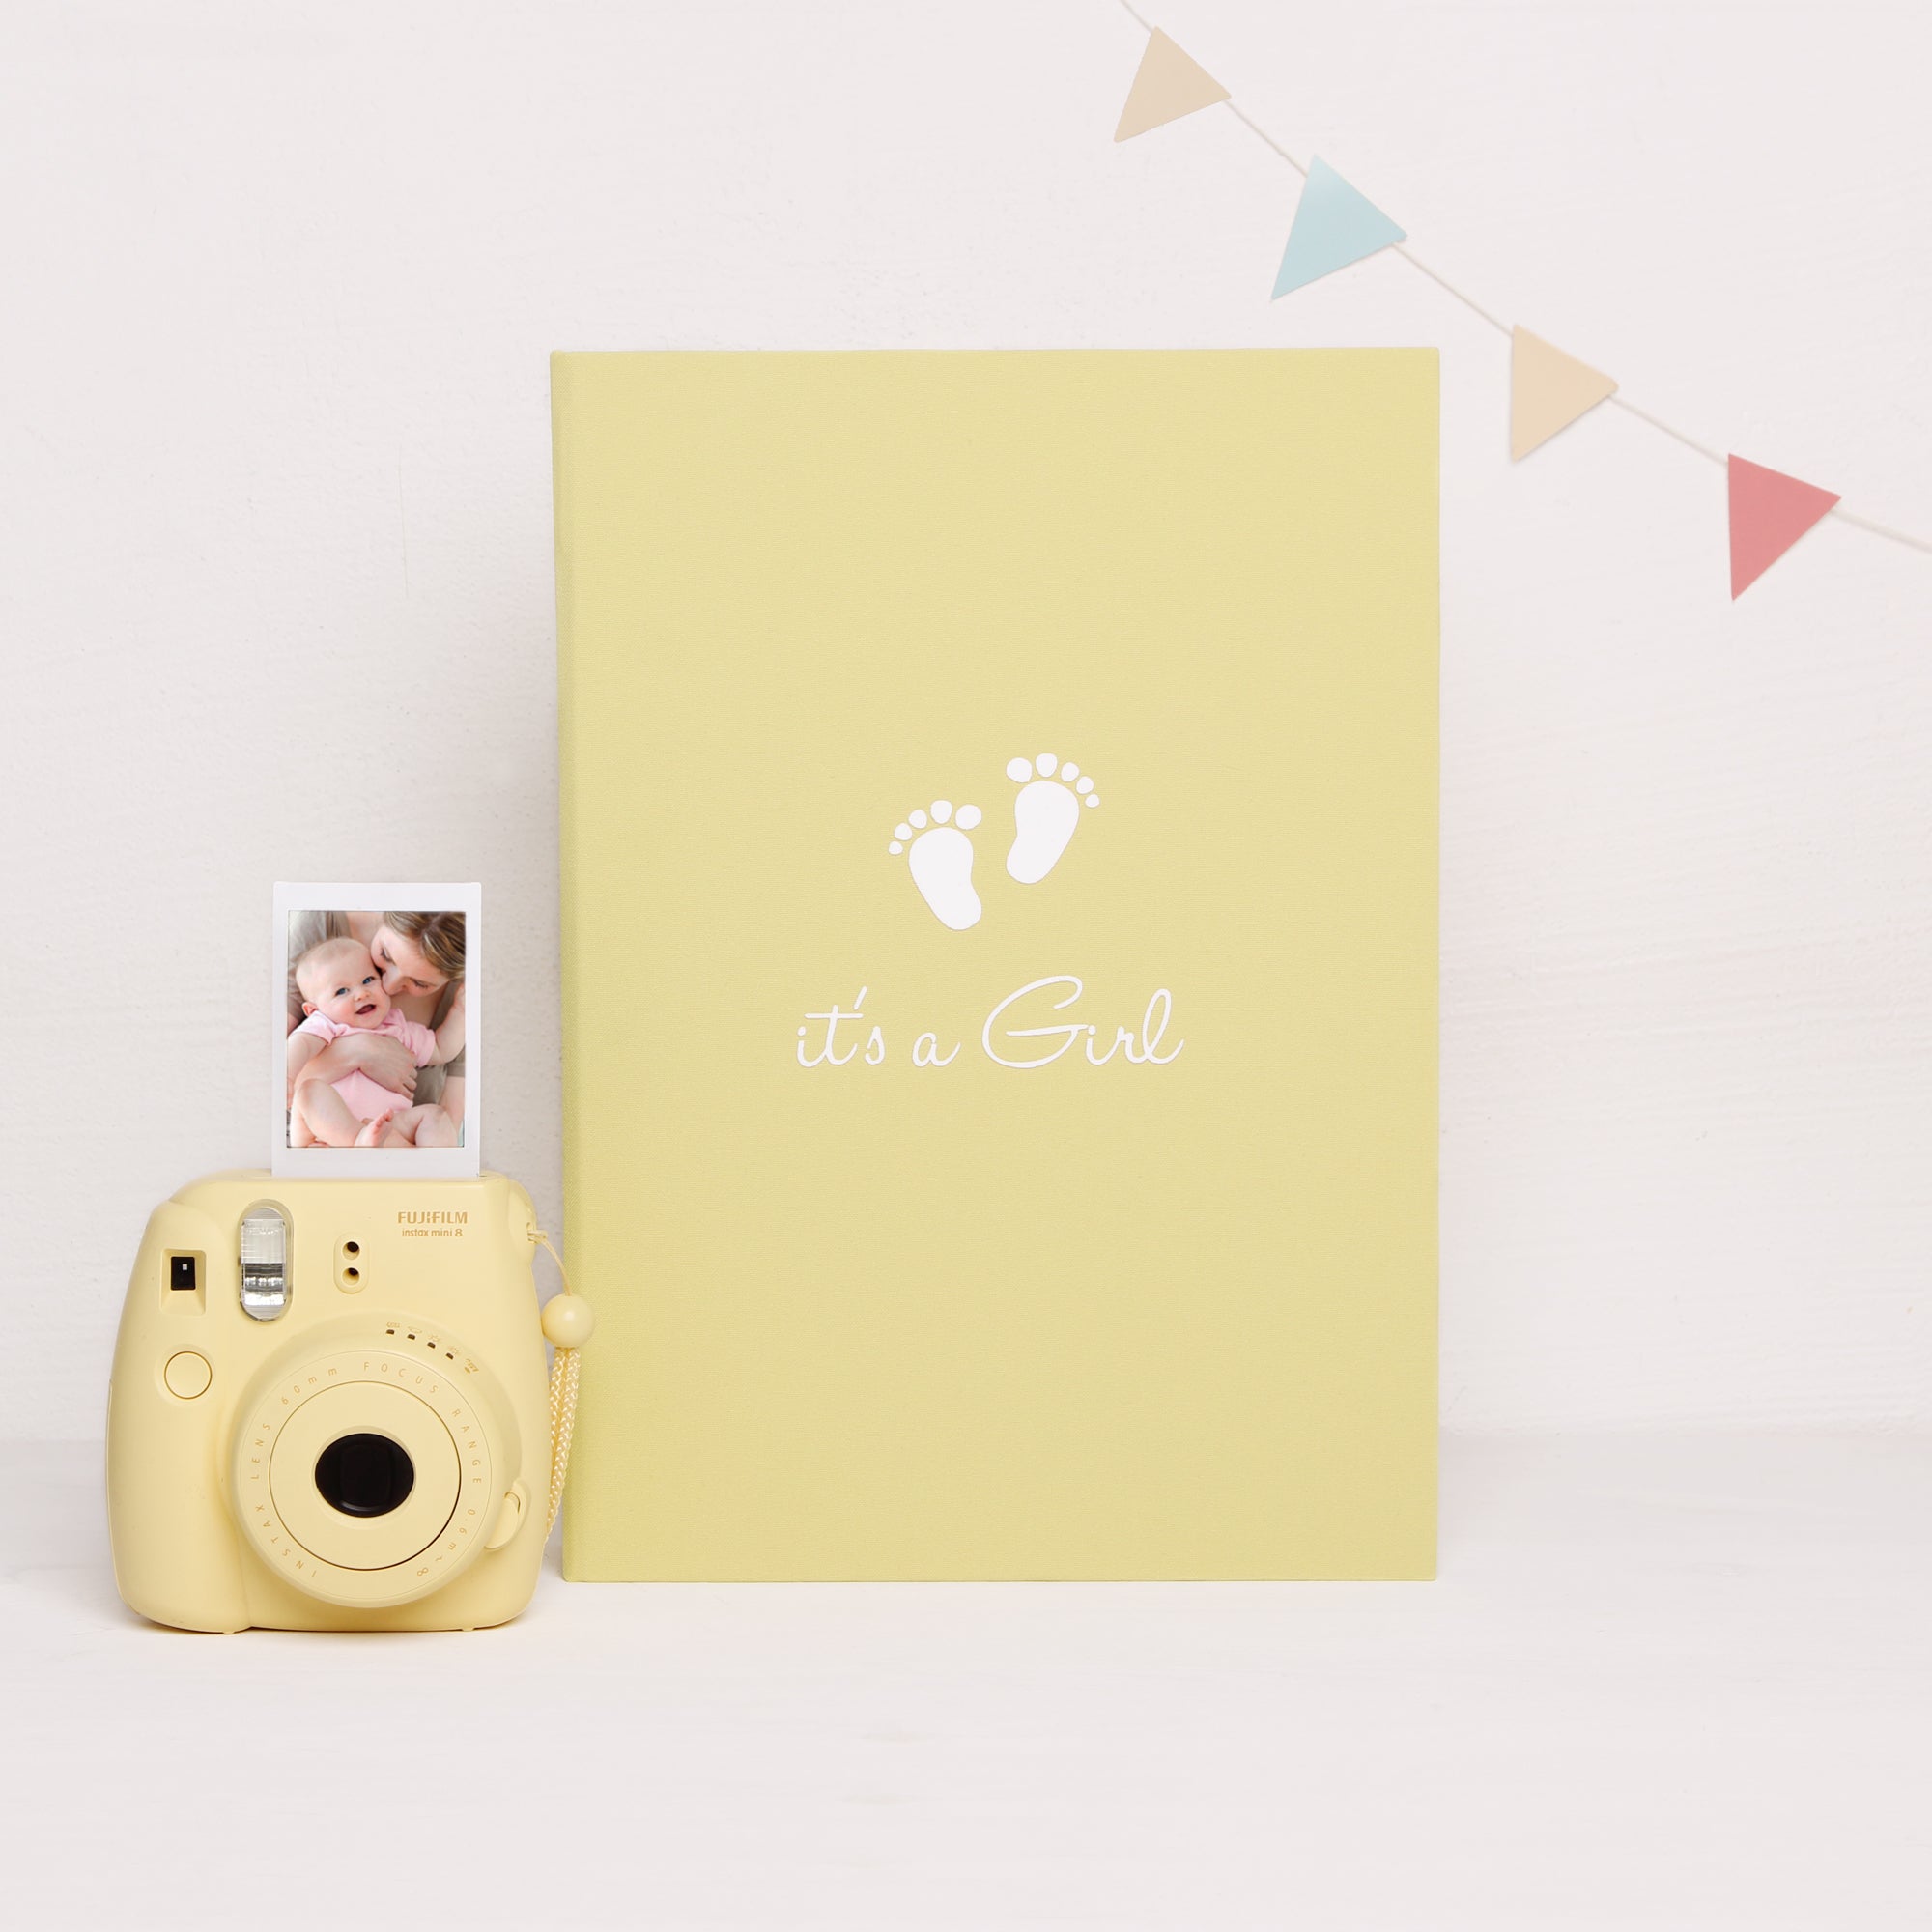 Christening Guest Book or Small Photo Book Personalised Gift for Baby Boy -   Sweden